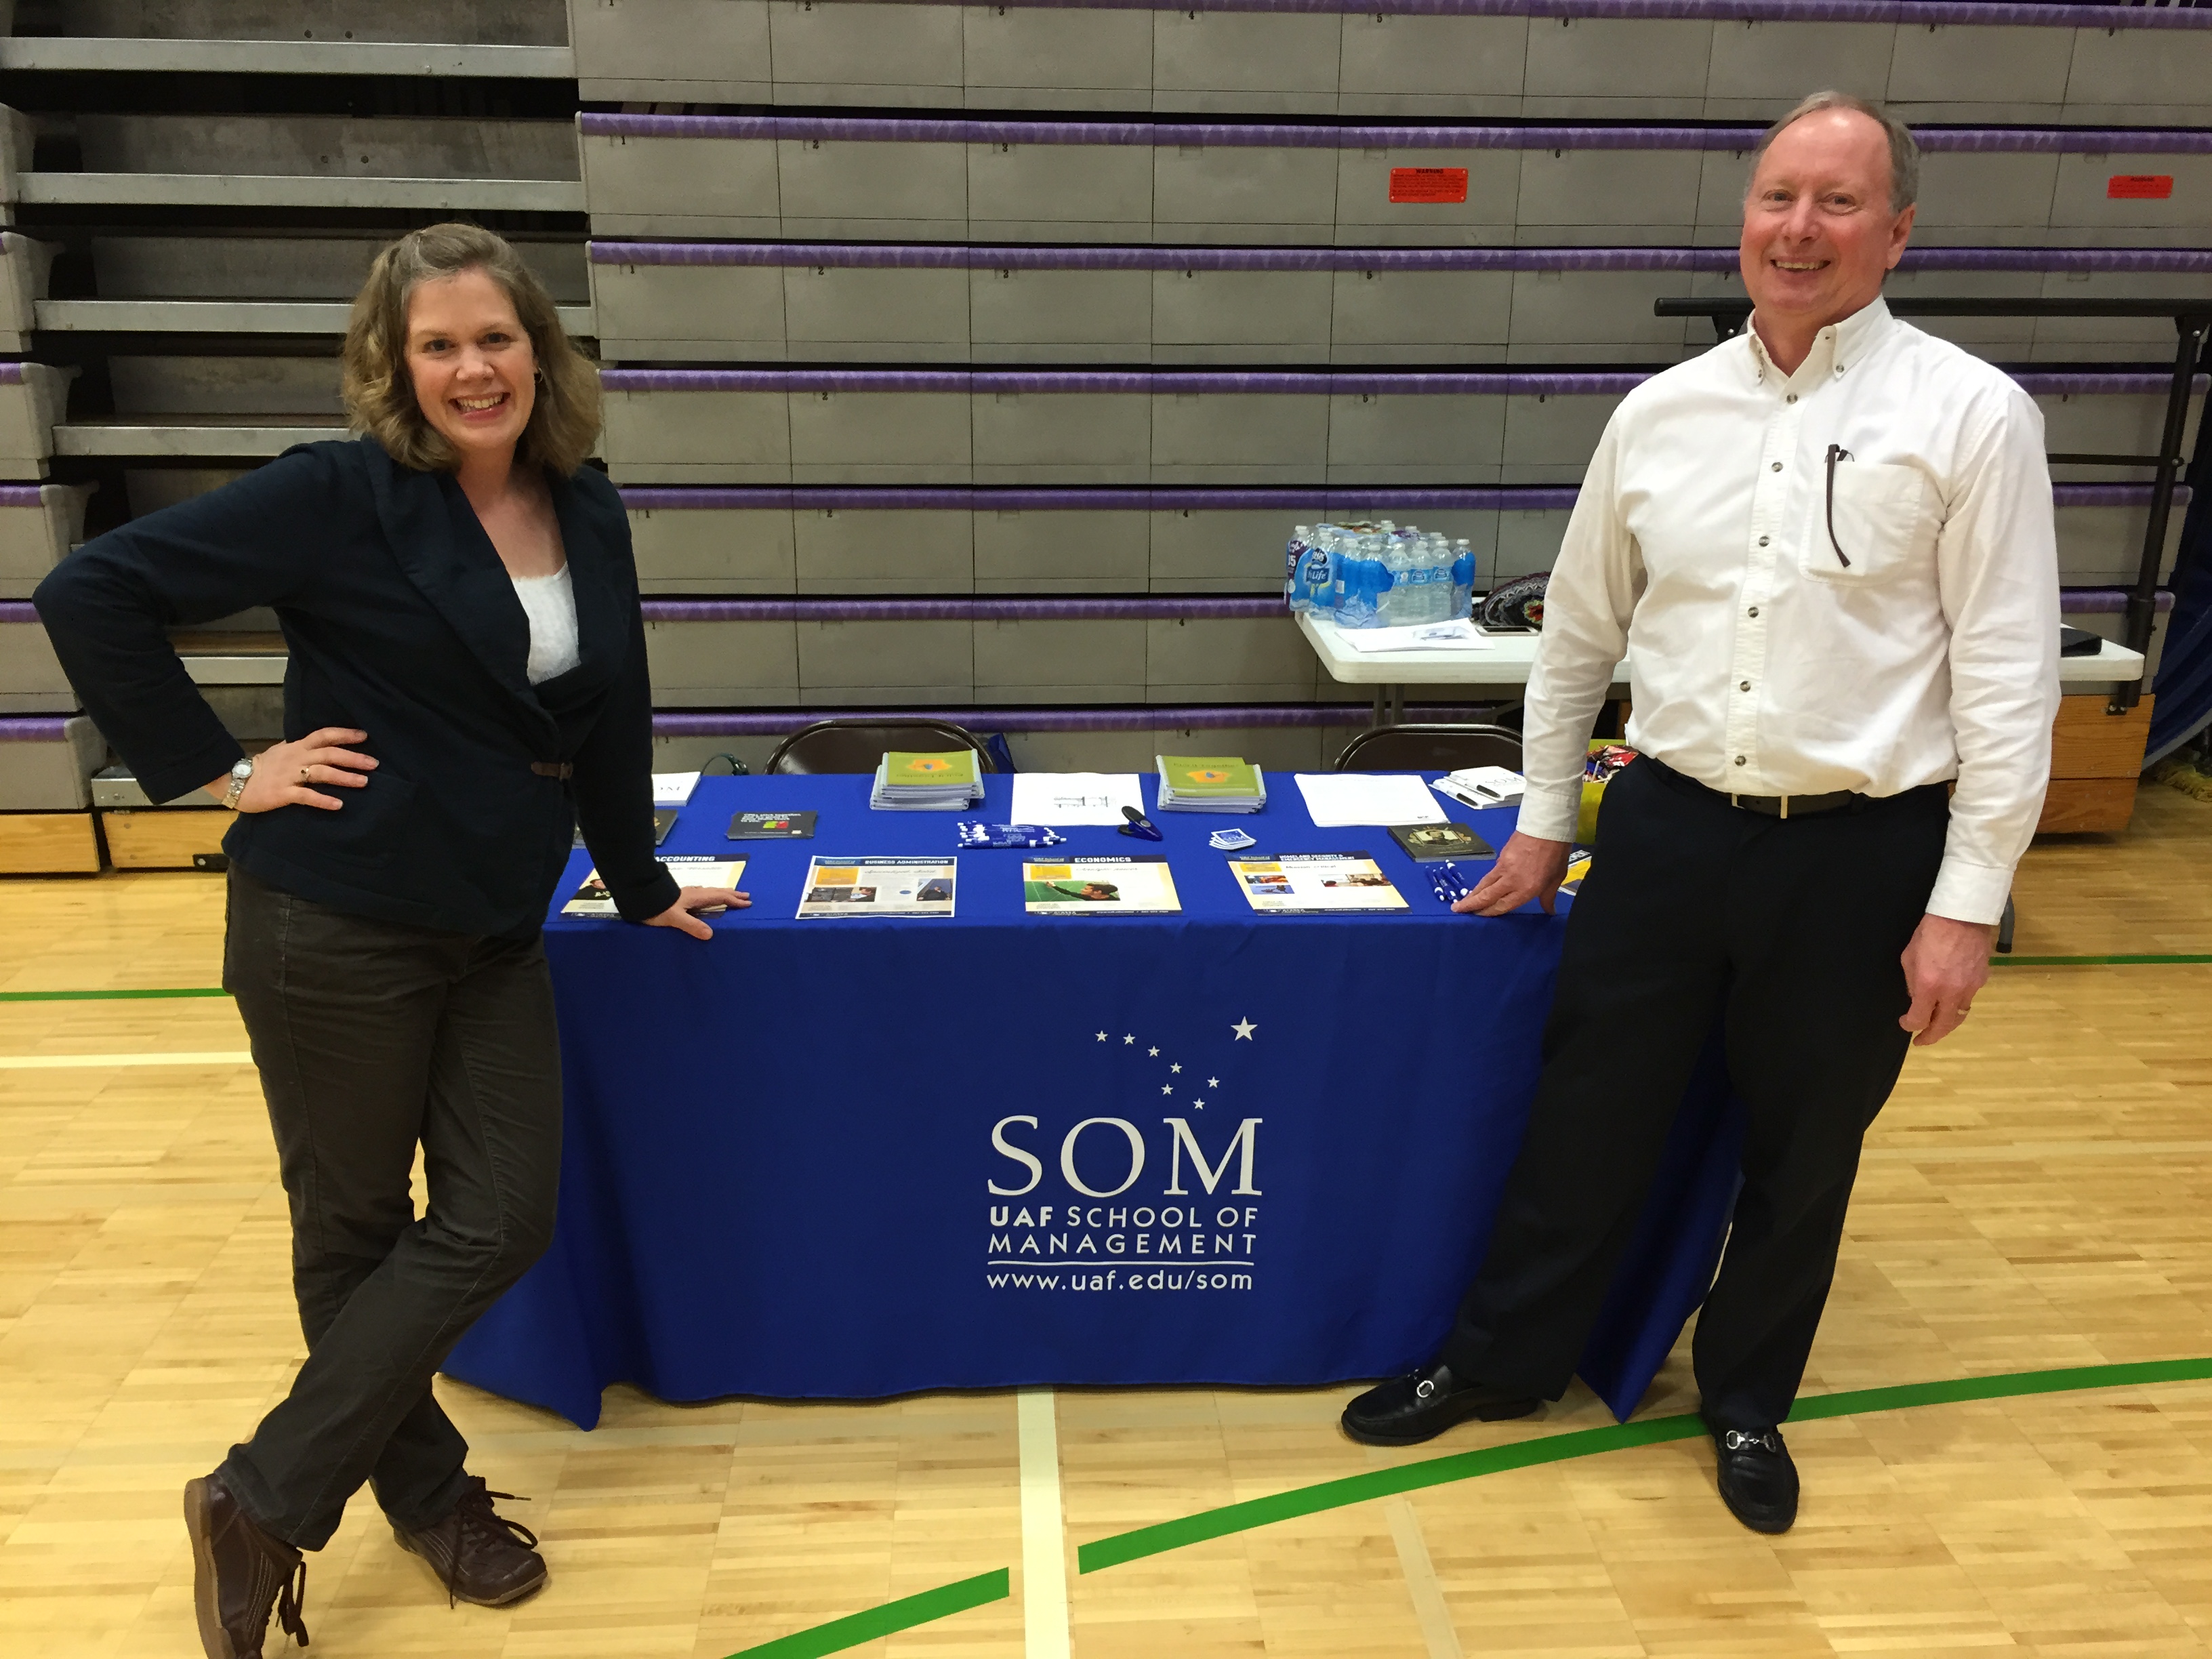 SOM Accounting faculty Amy Cooper and Charlie Sparks at the SOM info table